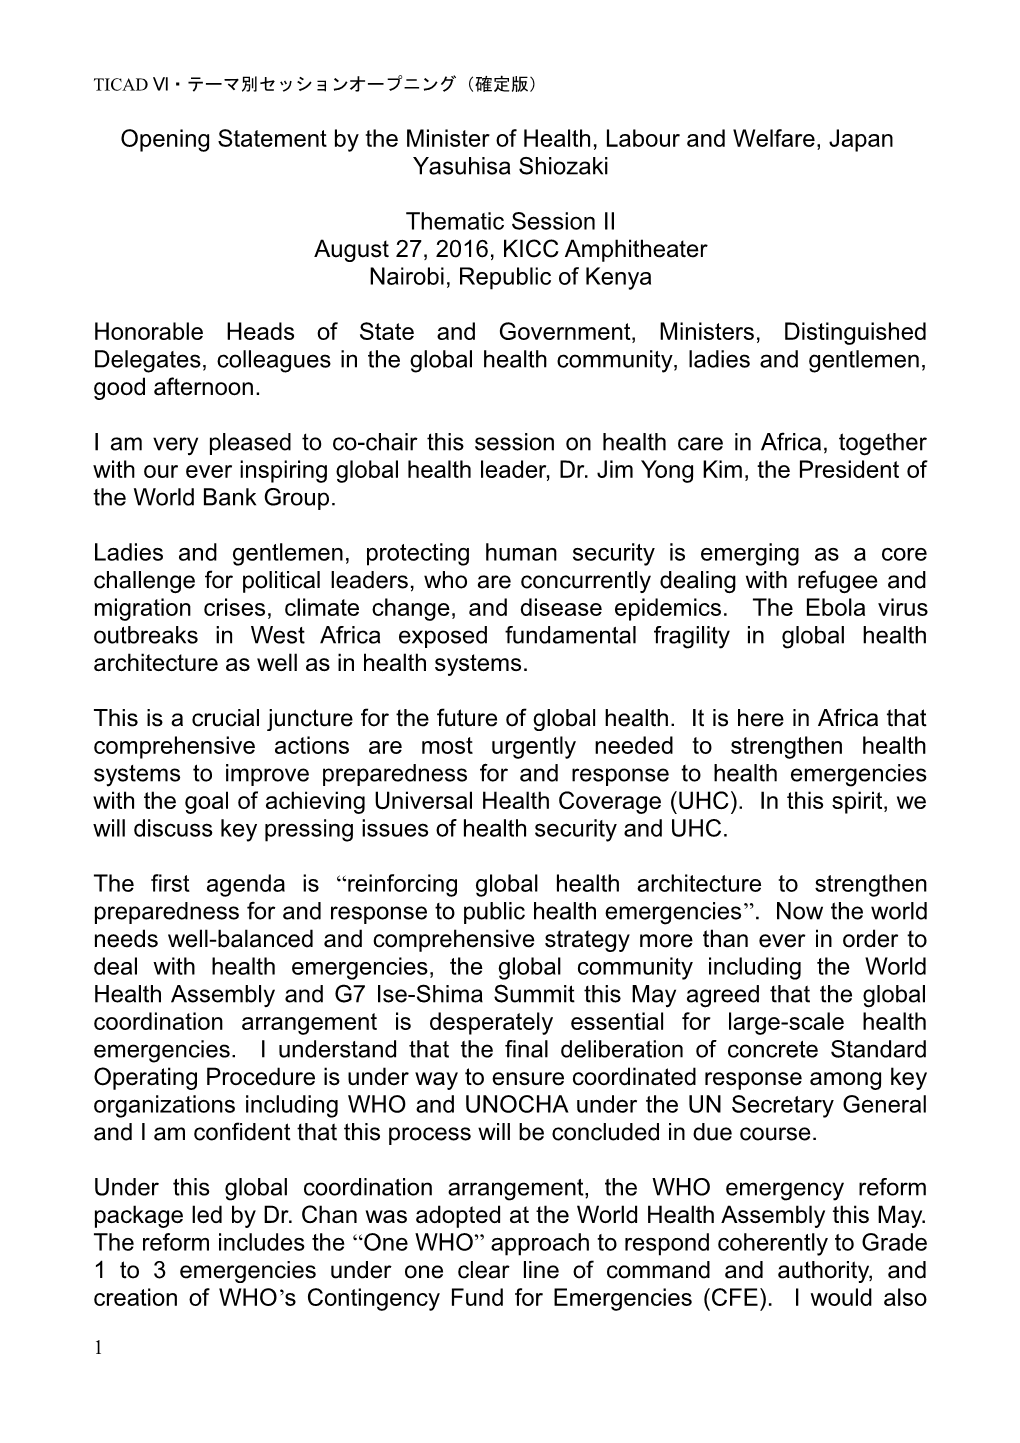 Opening Statement by the Minister of Health, Labour and Welfare, Japan